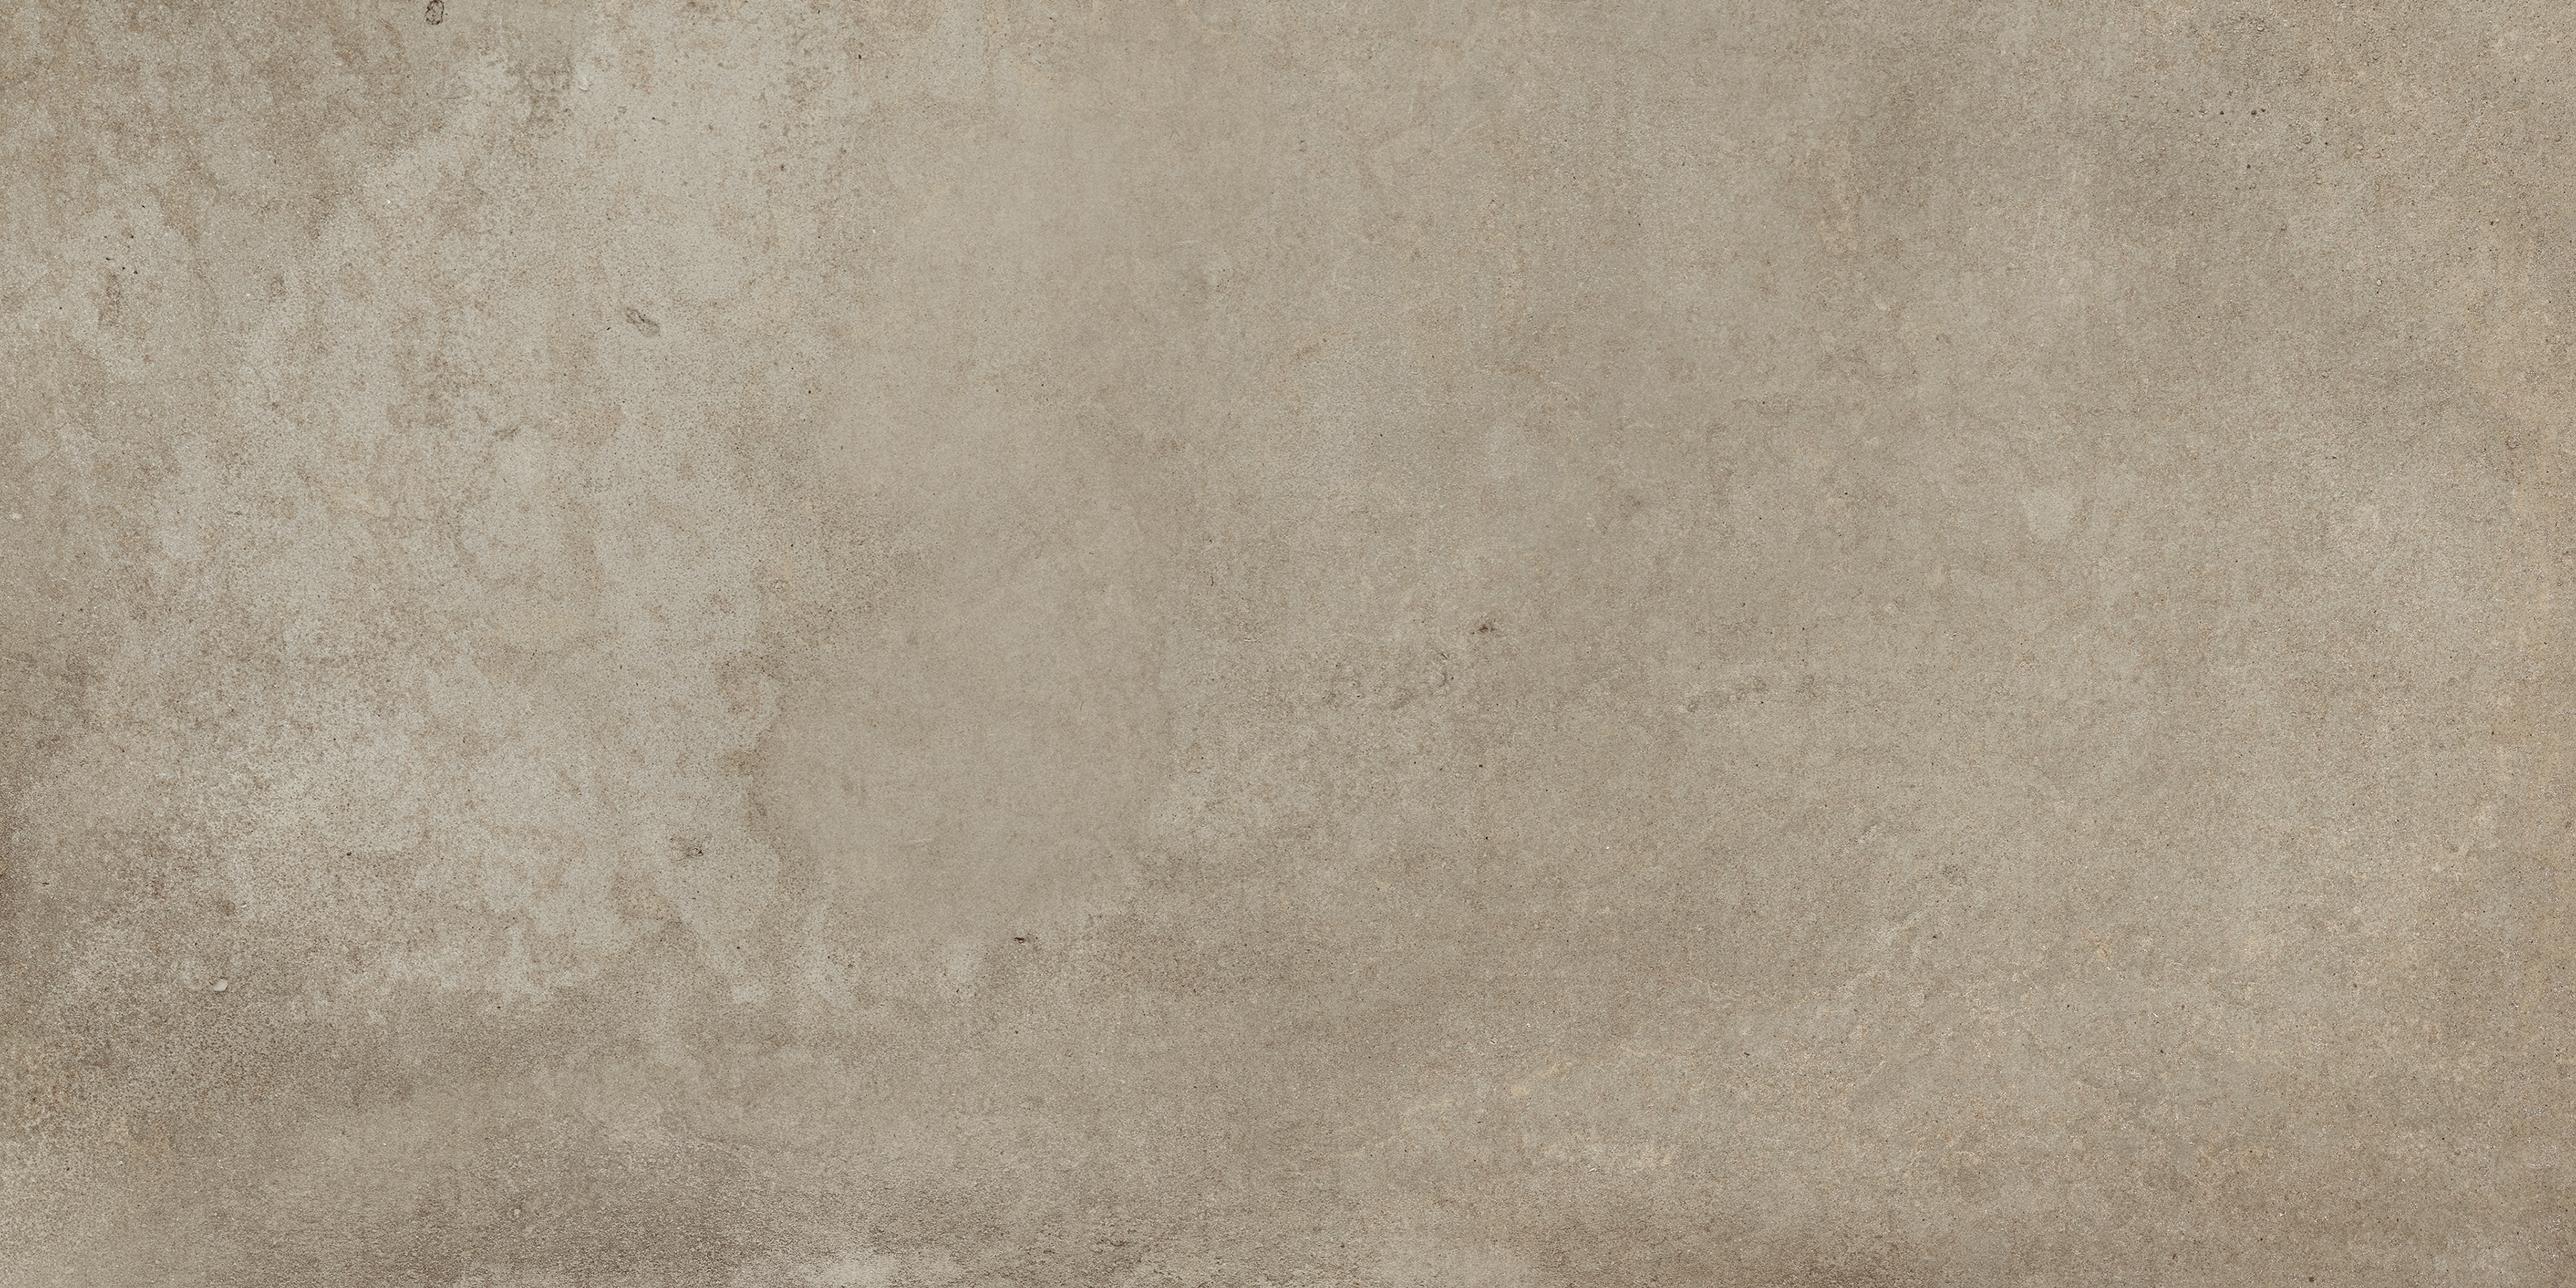 iron pattern color body porcelain field tile from ceraforge anatolia collection distributed by surface group international matte finish rectified edge 12x24 rectangle shape